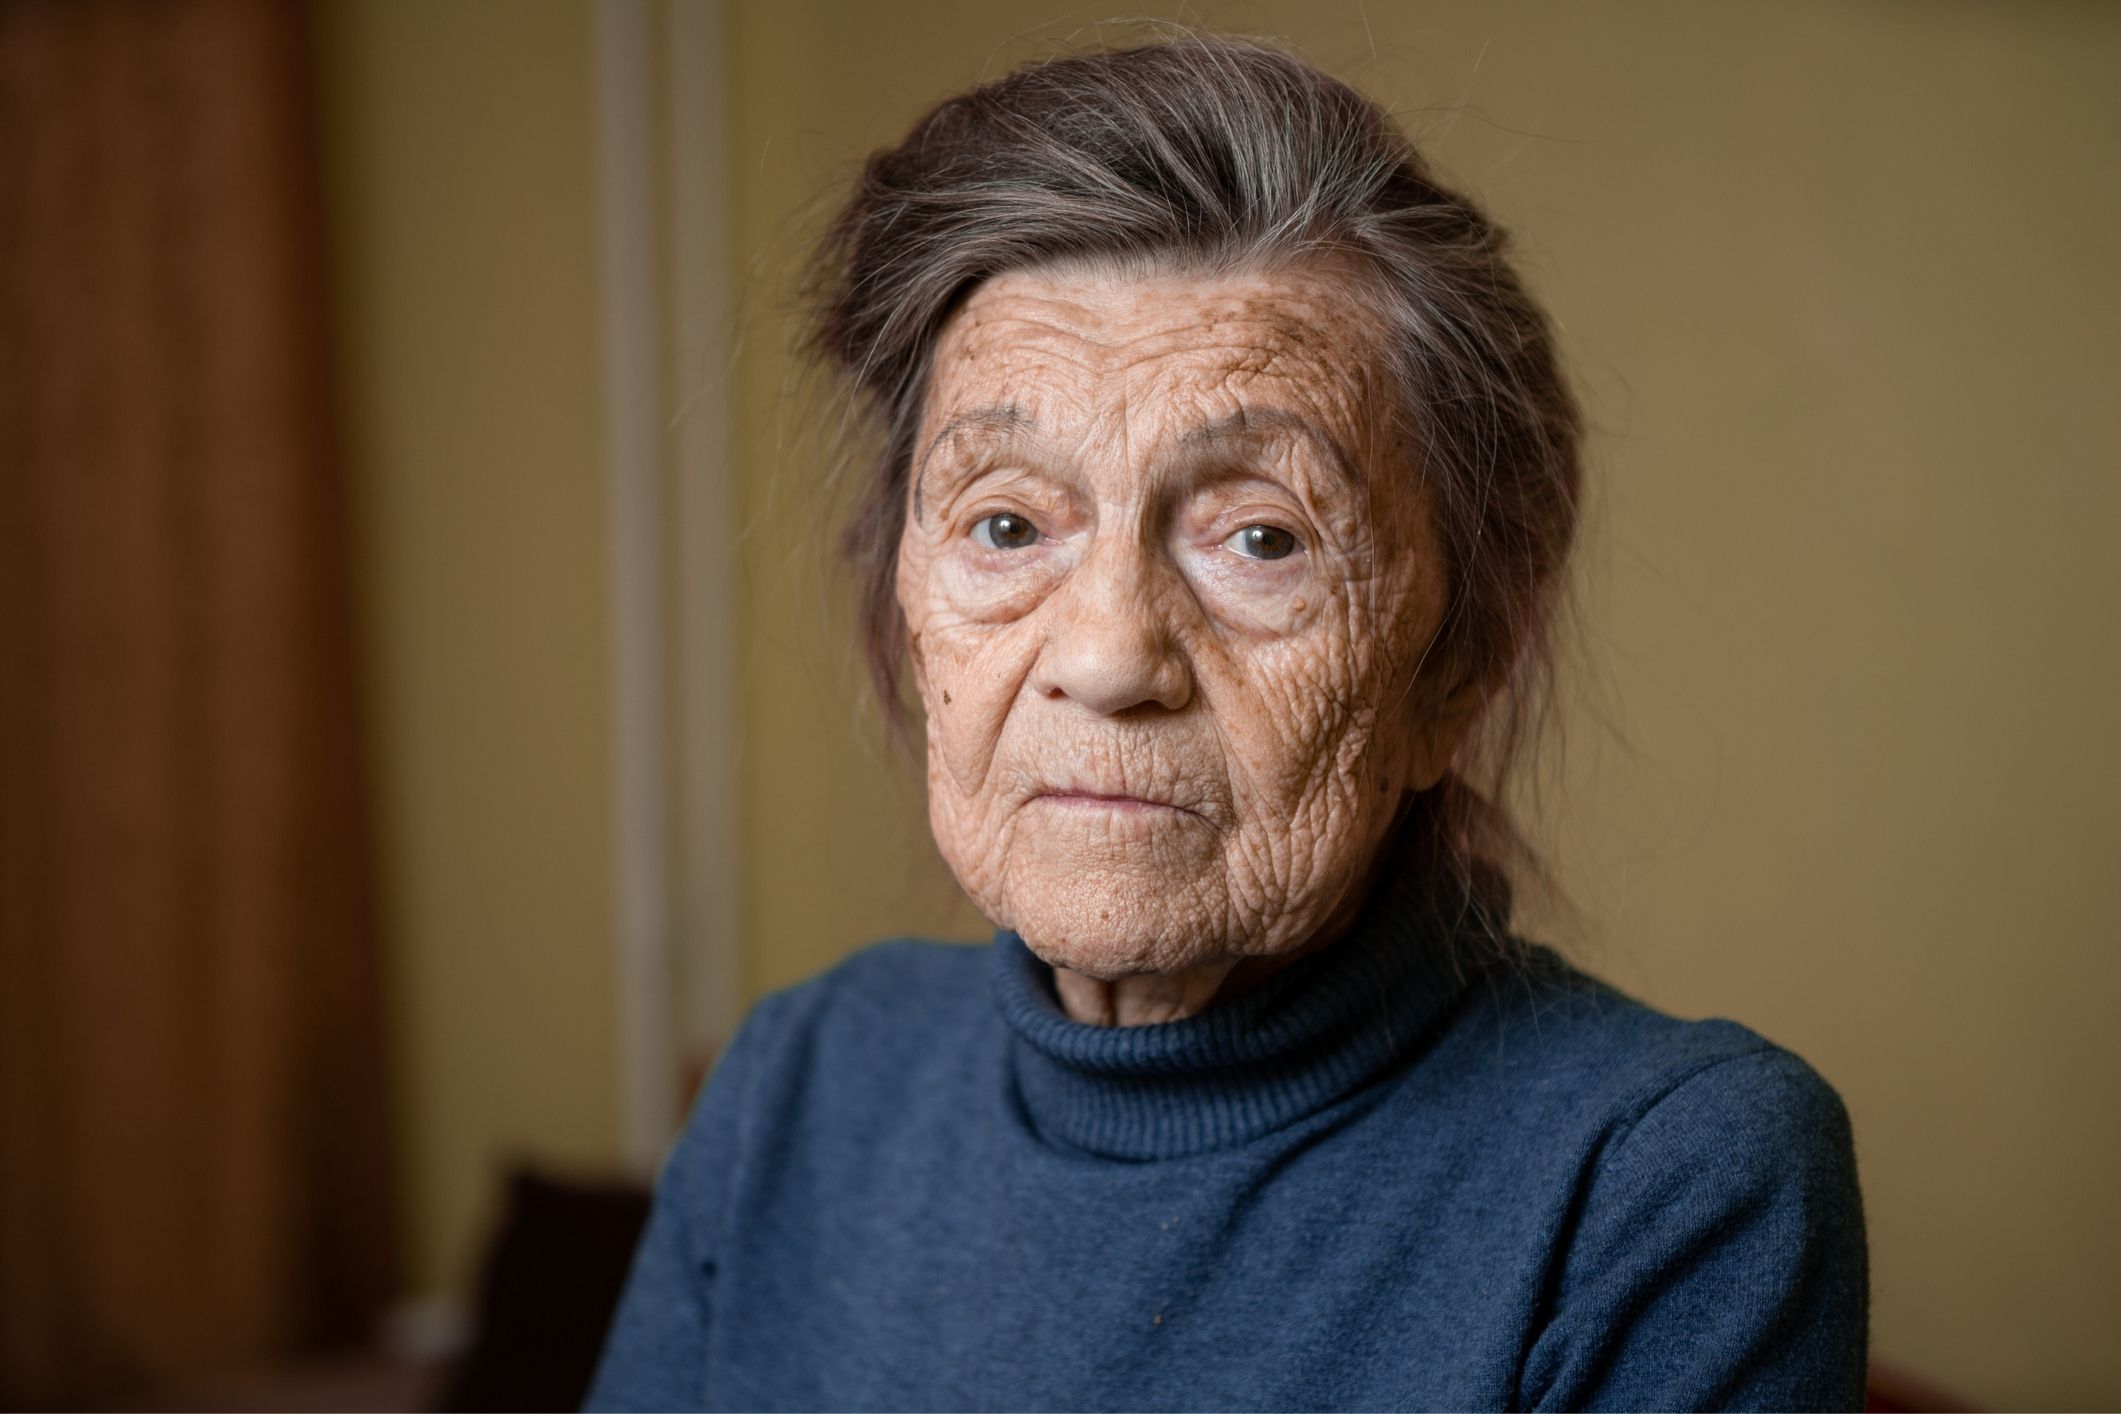 Aged care staff’s awareness of unwanted sexual behaviour in Australian aged-care services